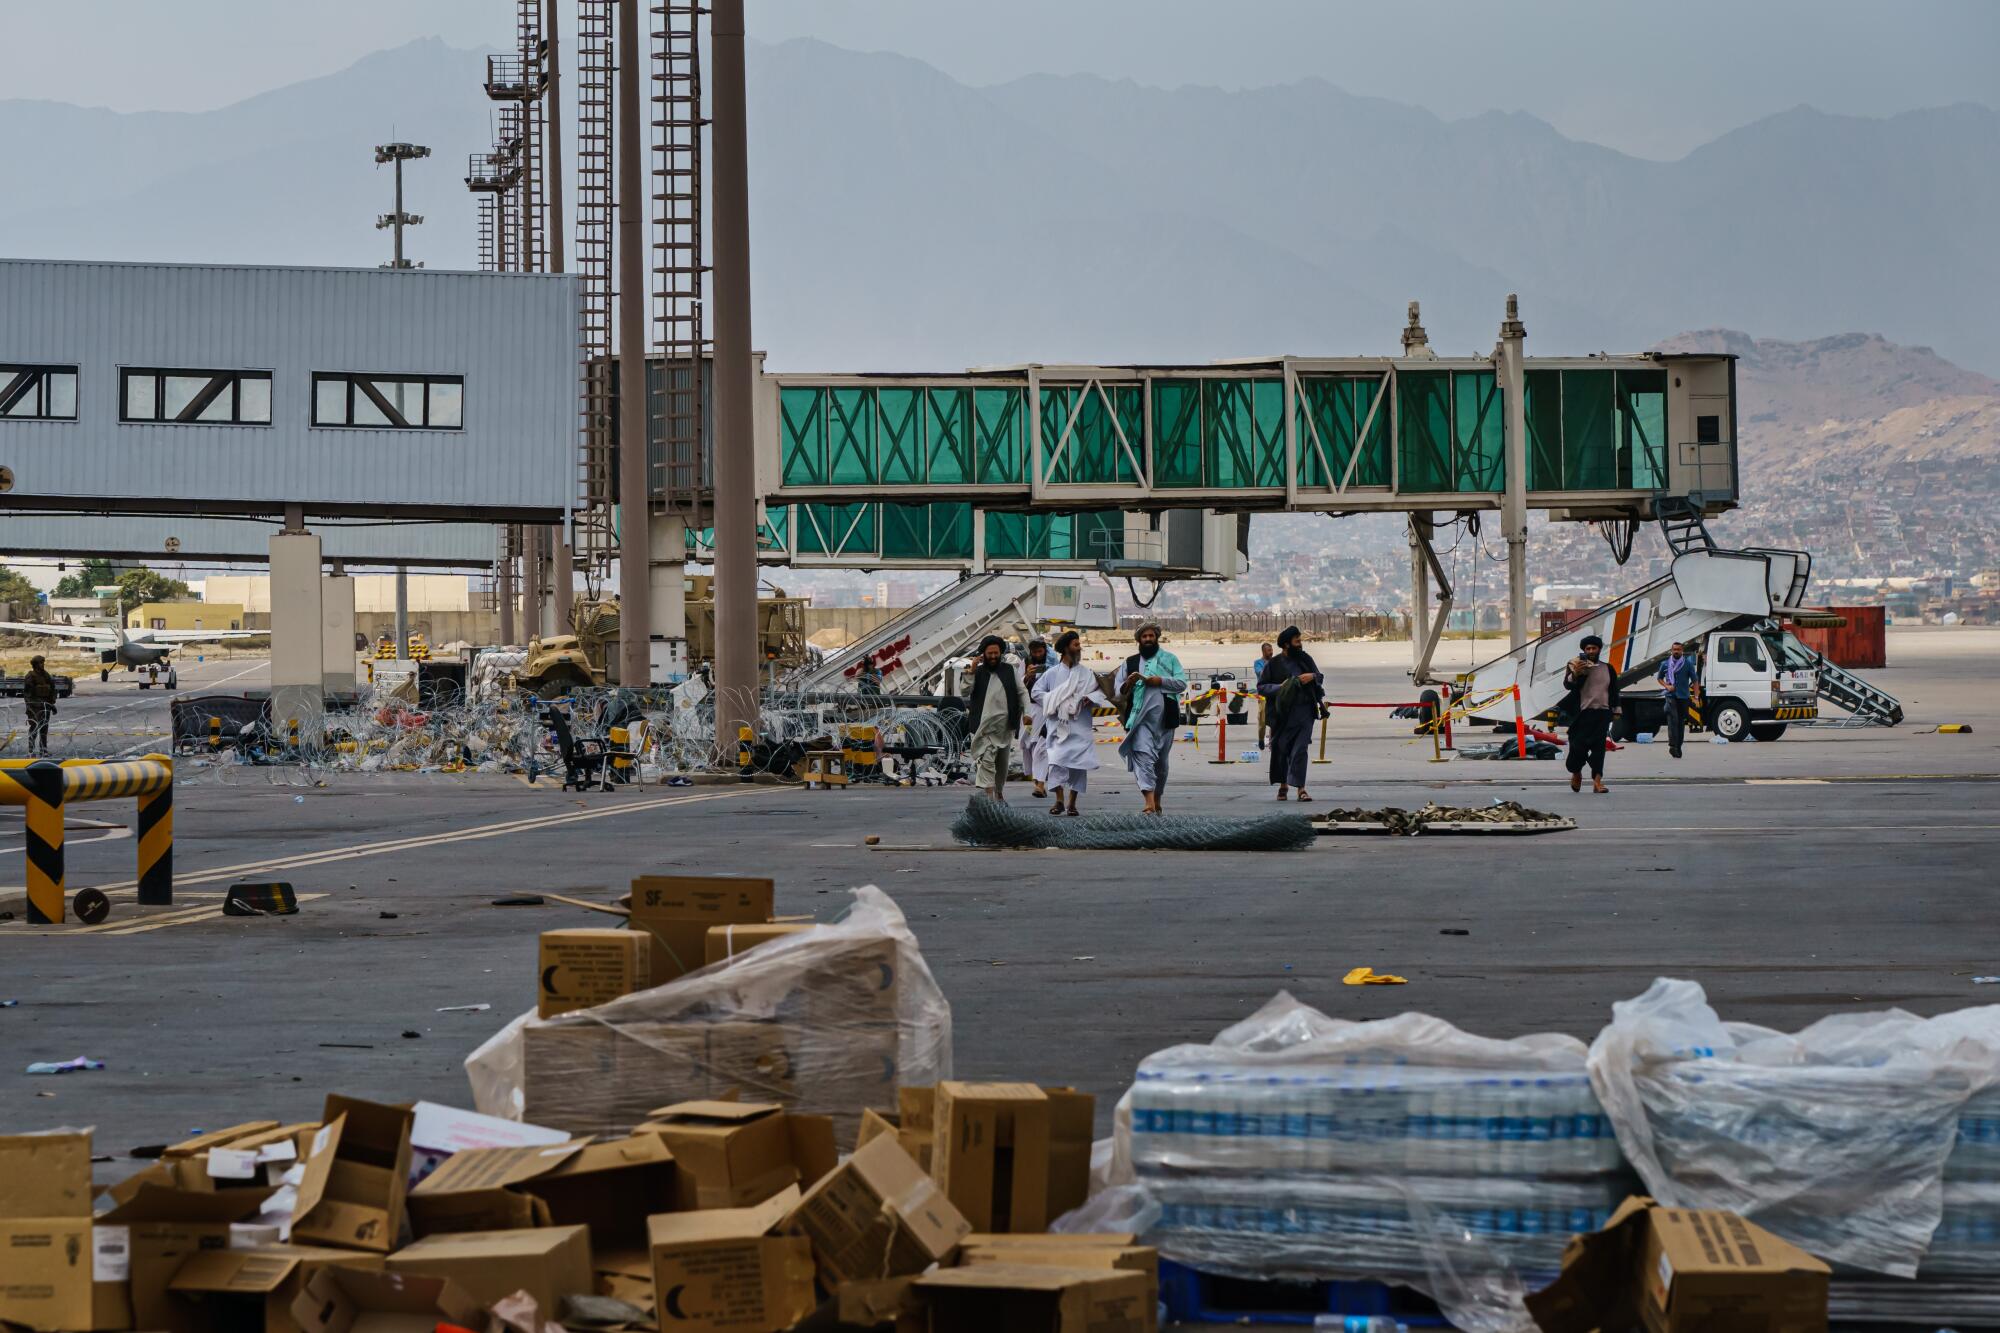 Taliban fighters walk toward stacks of bottled water and other supplies left on the tarmac at the Kabul airport